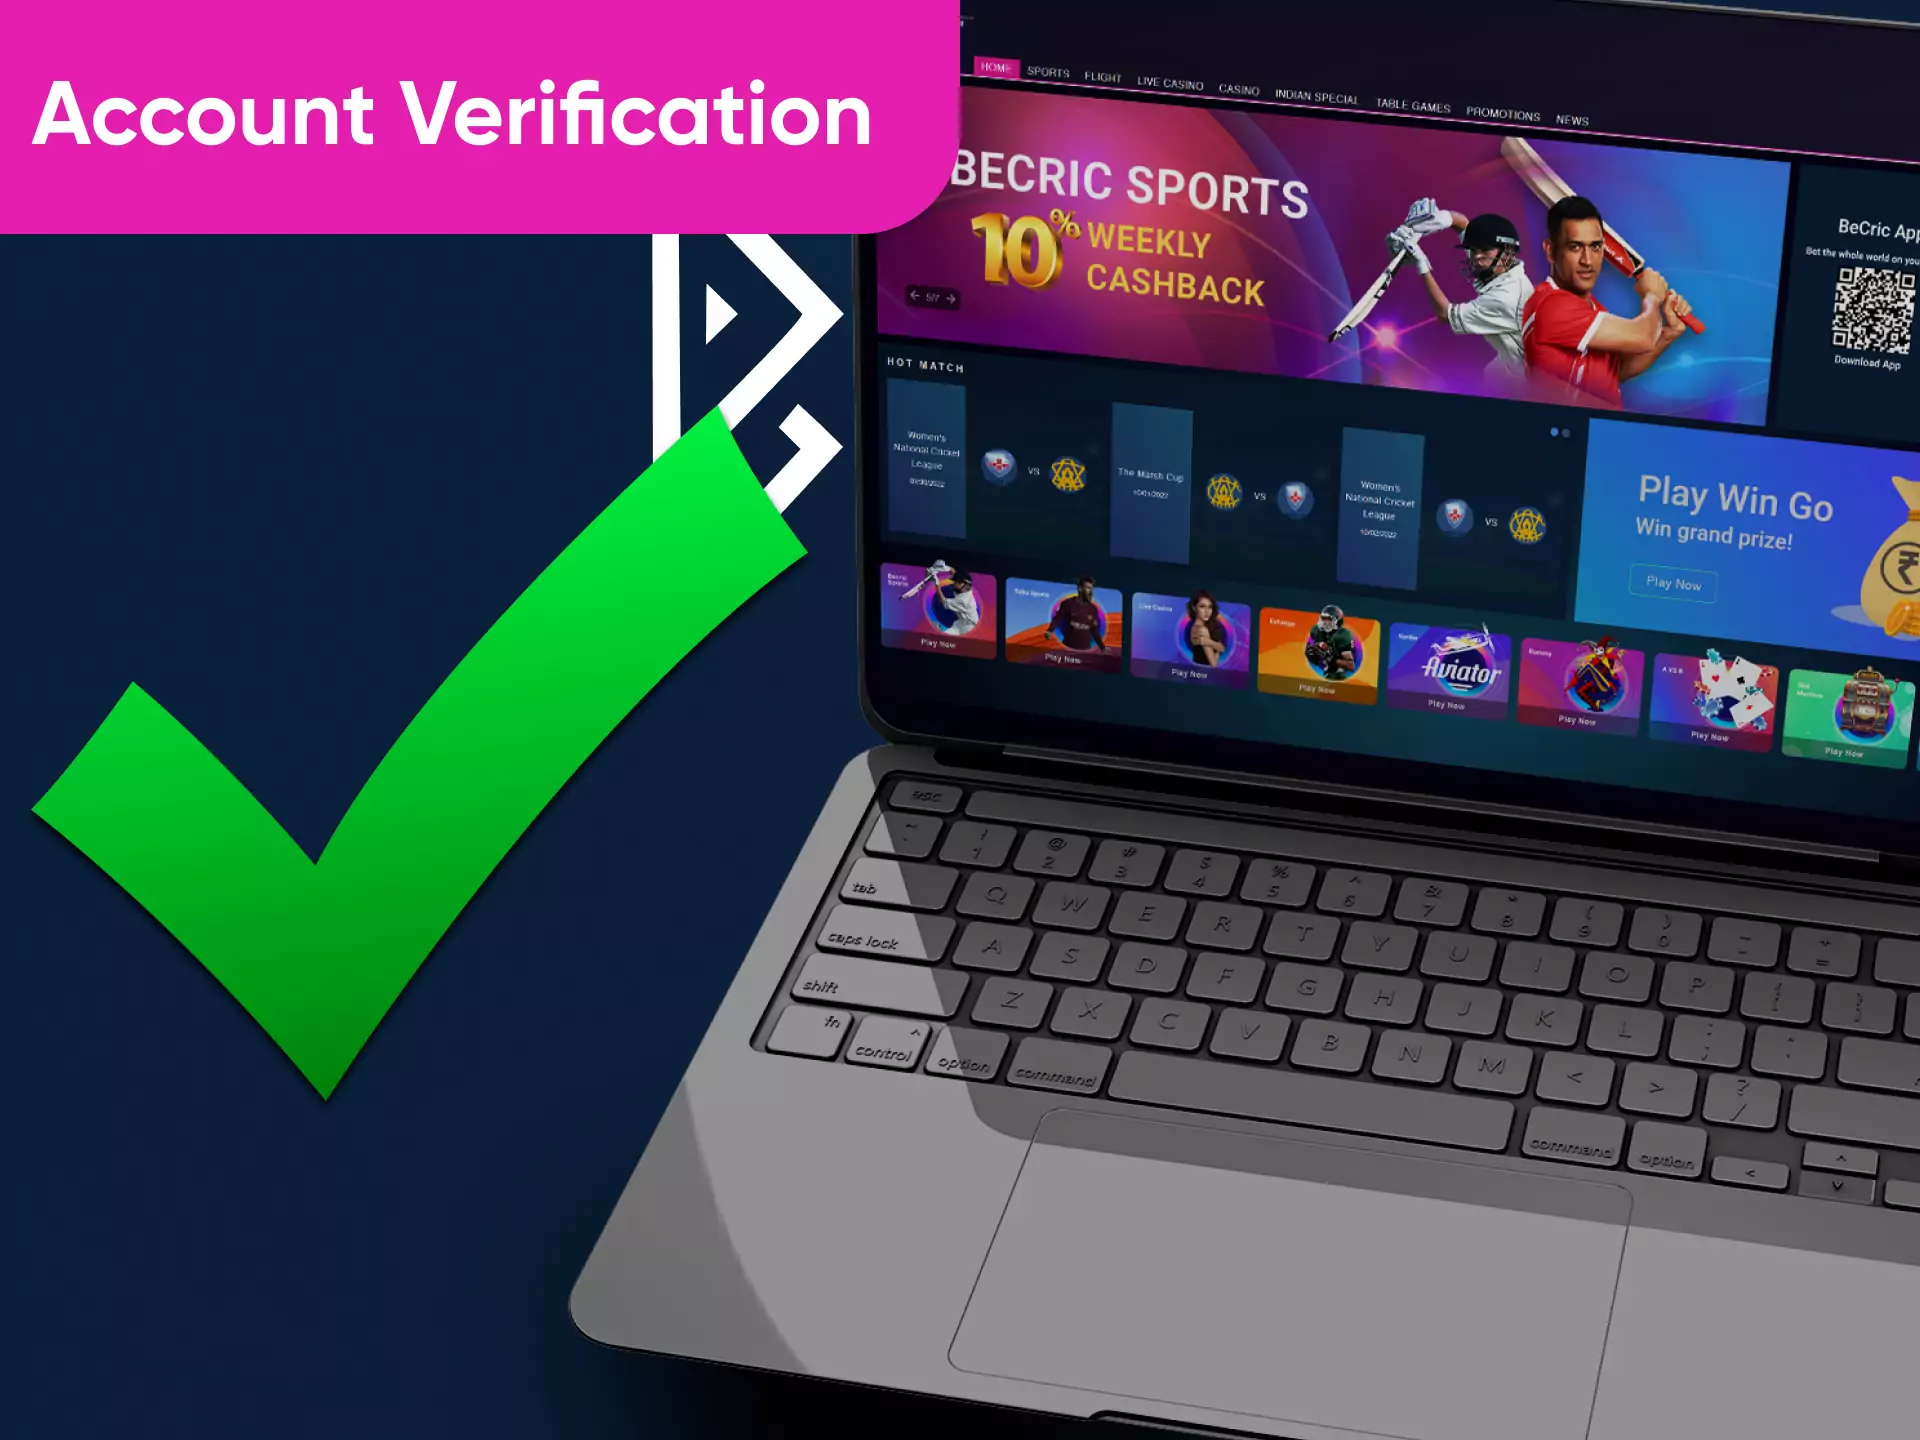 Before starting betting, you have to verify your Becric account.